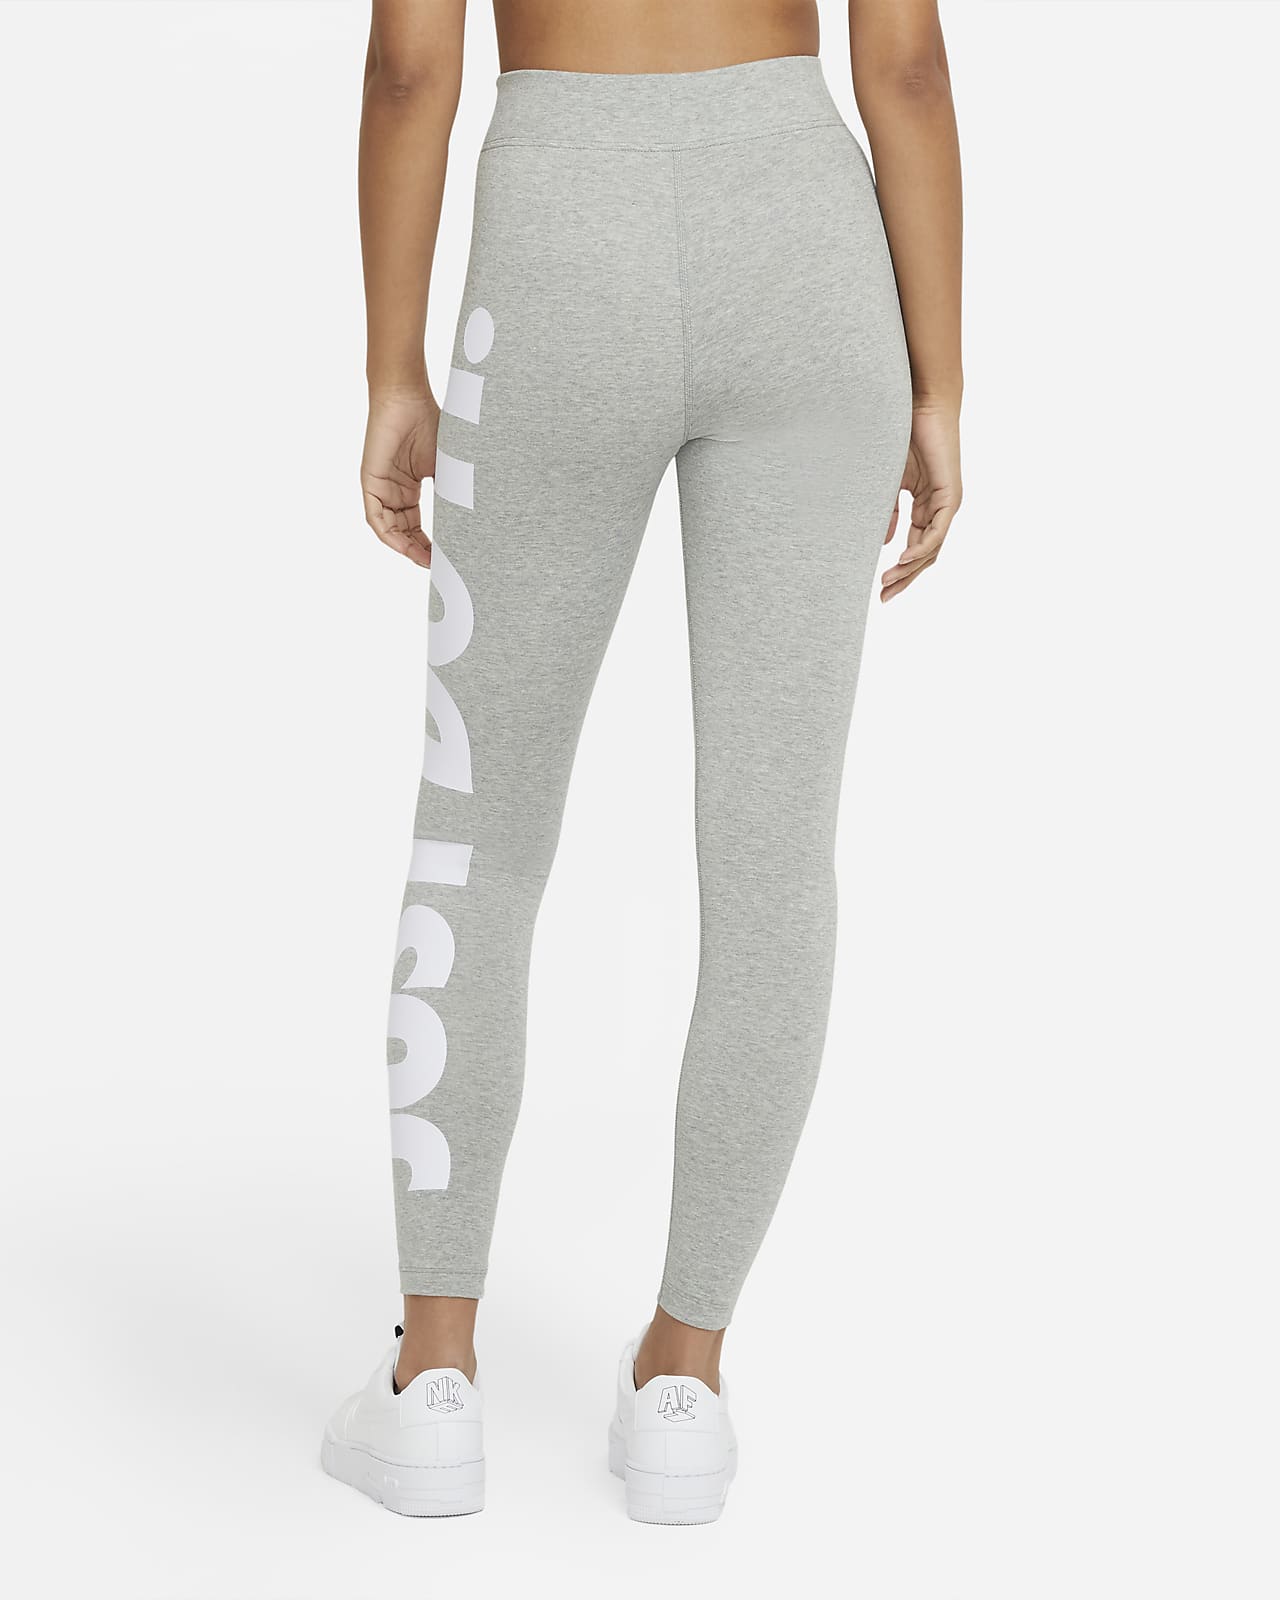  Nike Sportswear Essential Women's High-Waisted Graphic Leggings  Size-Large Dark Grey Heather : Clothing, Shoes & Jewelry